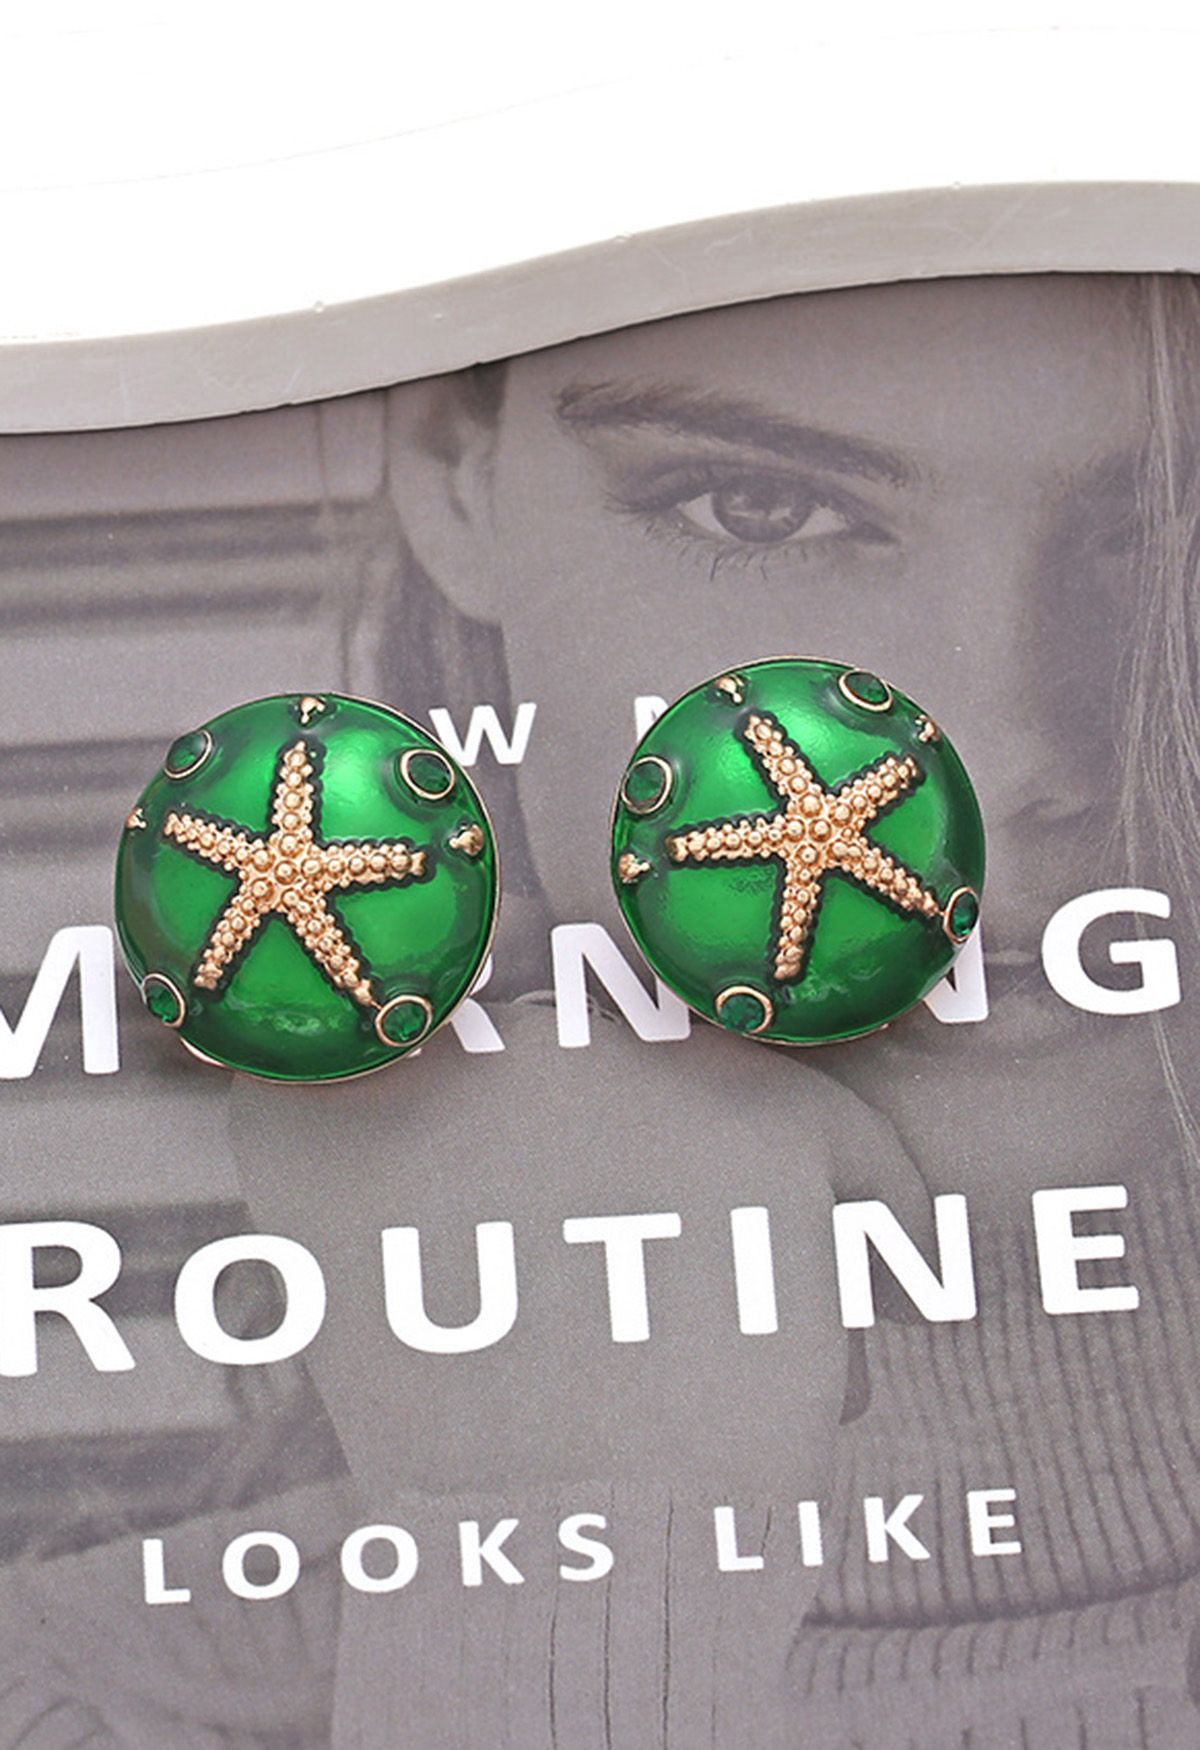 Rounded Starfish Oil Spill Earrings in Green